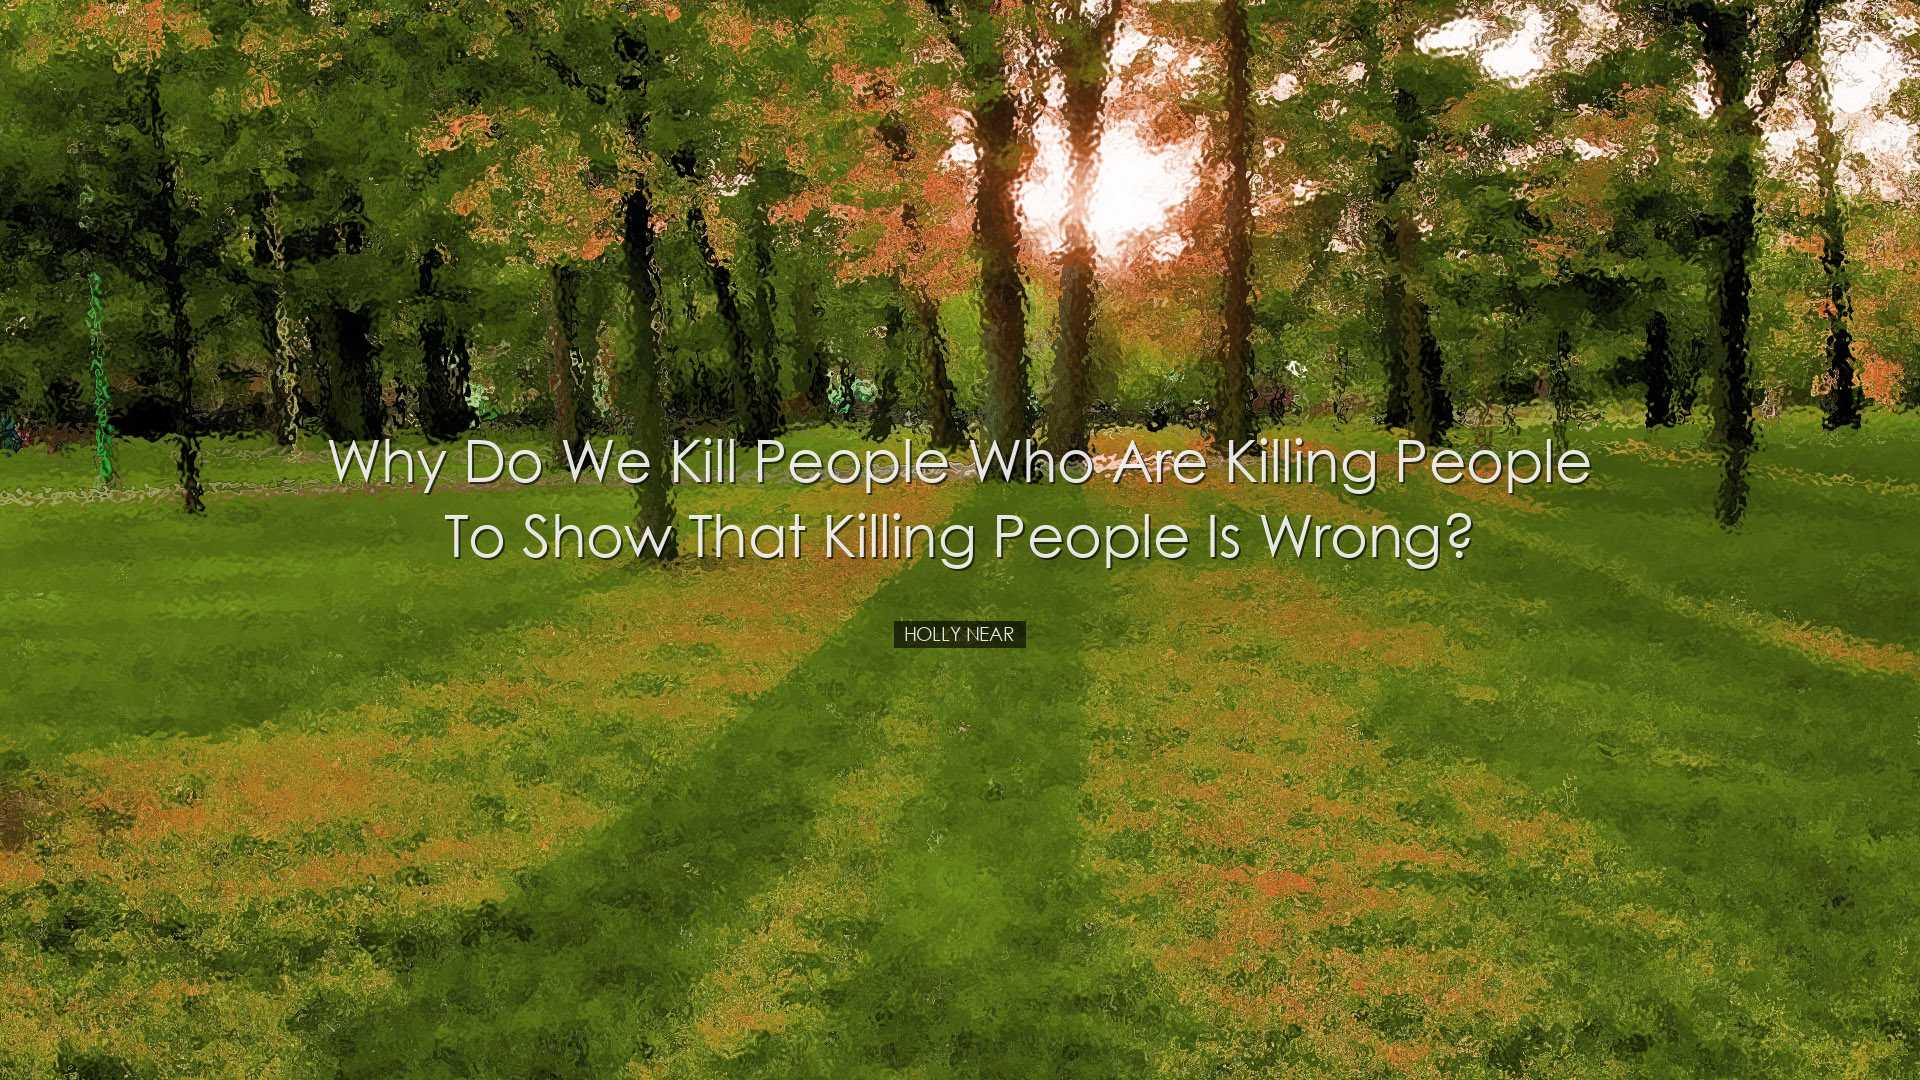 Why do we kill people who are killing people to show that killing